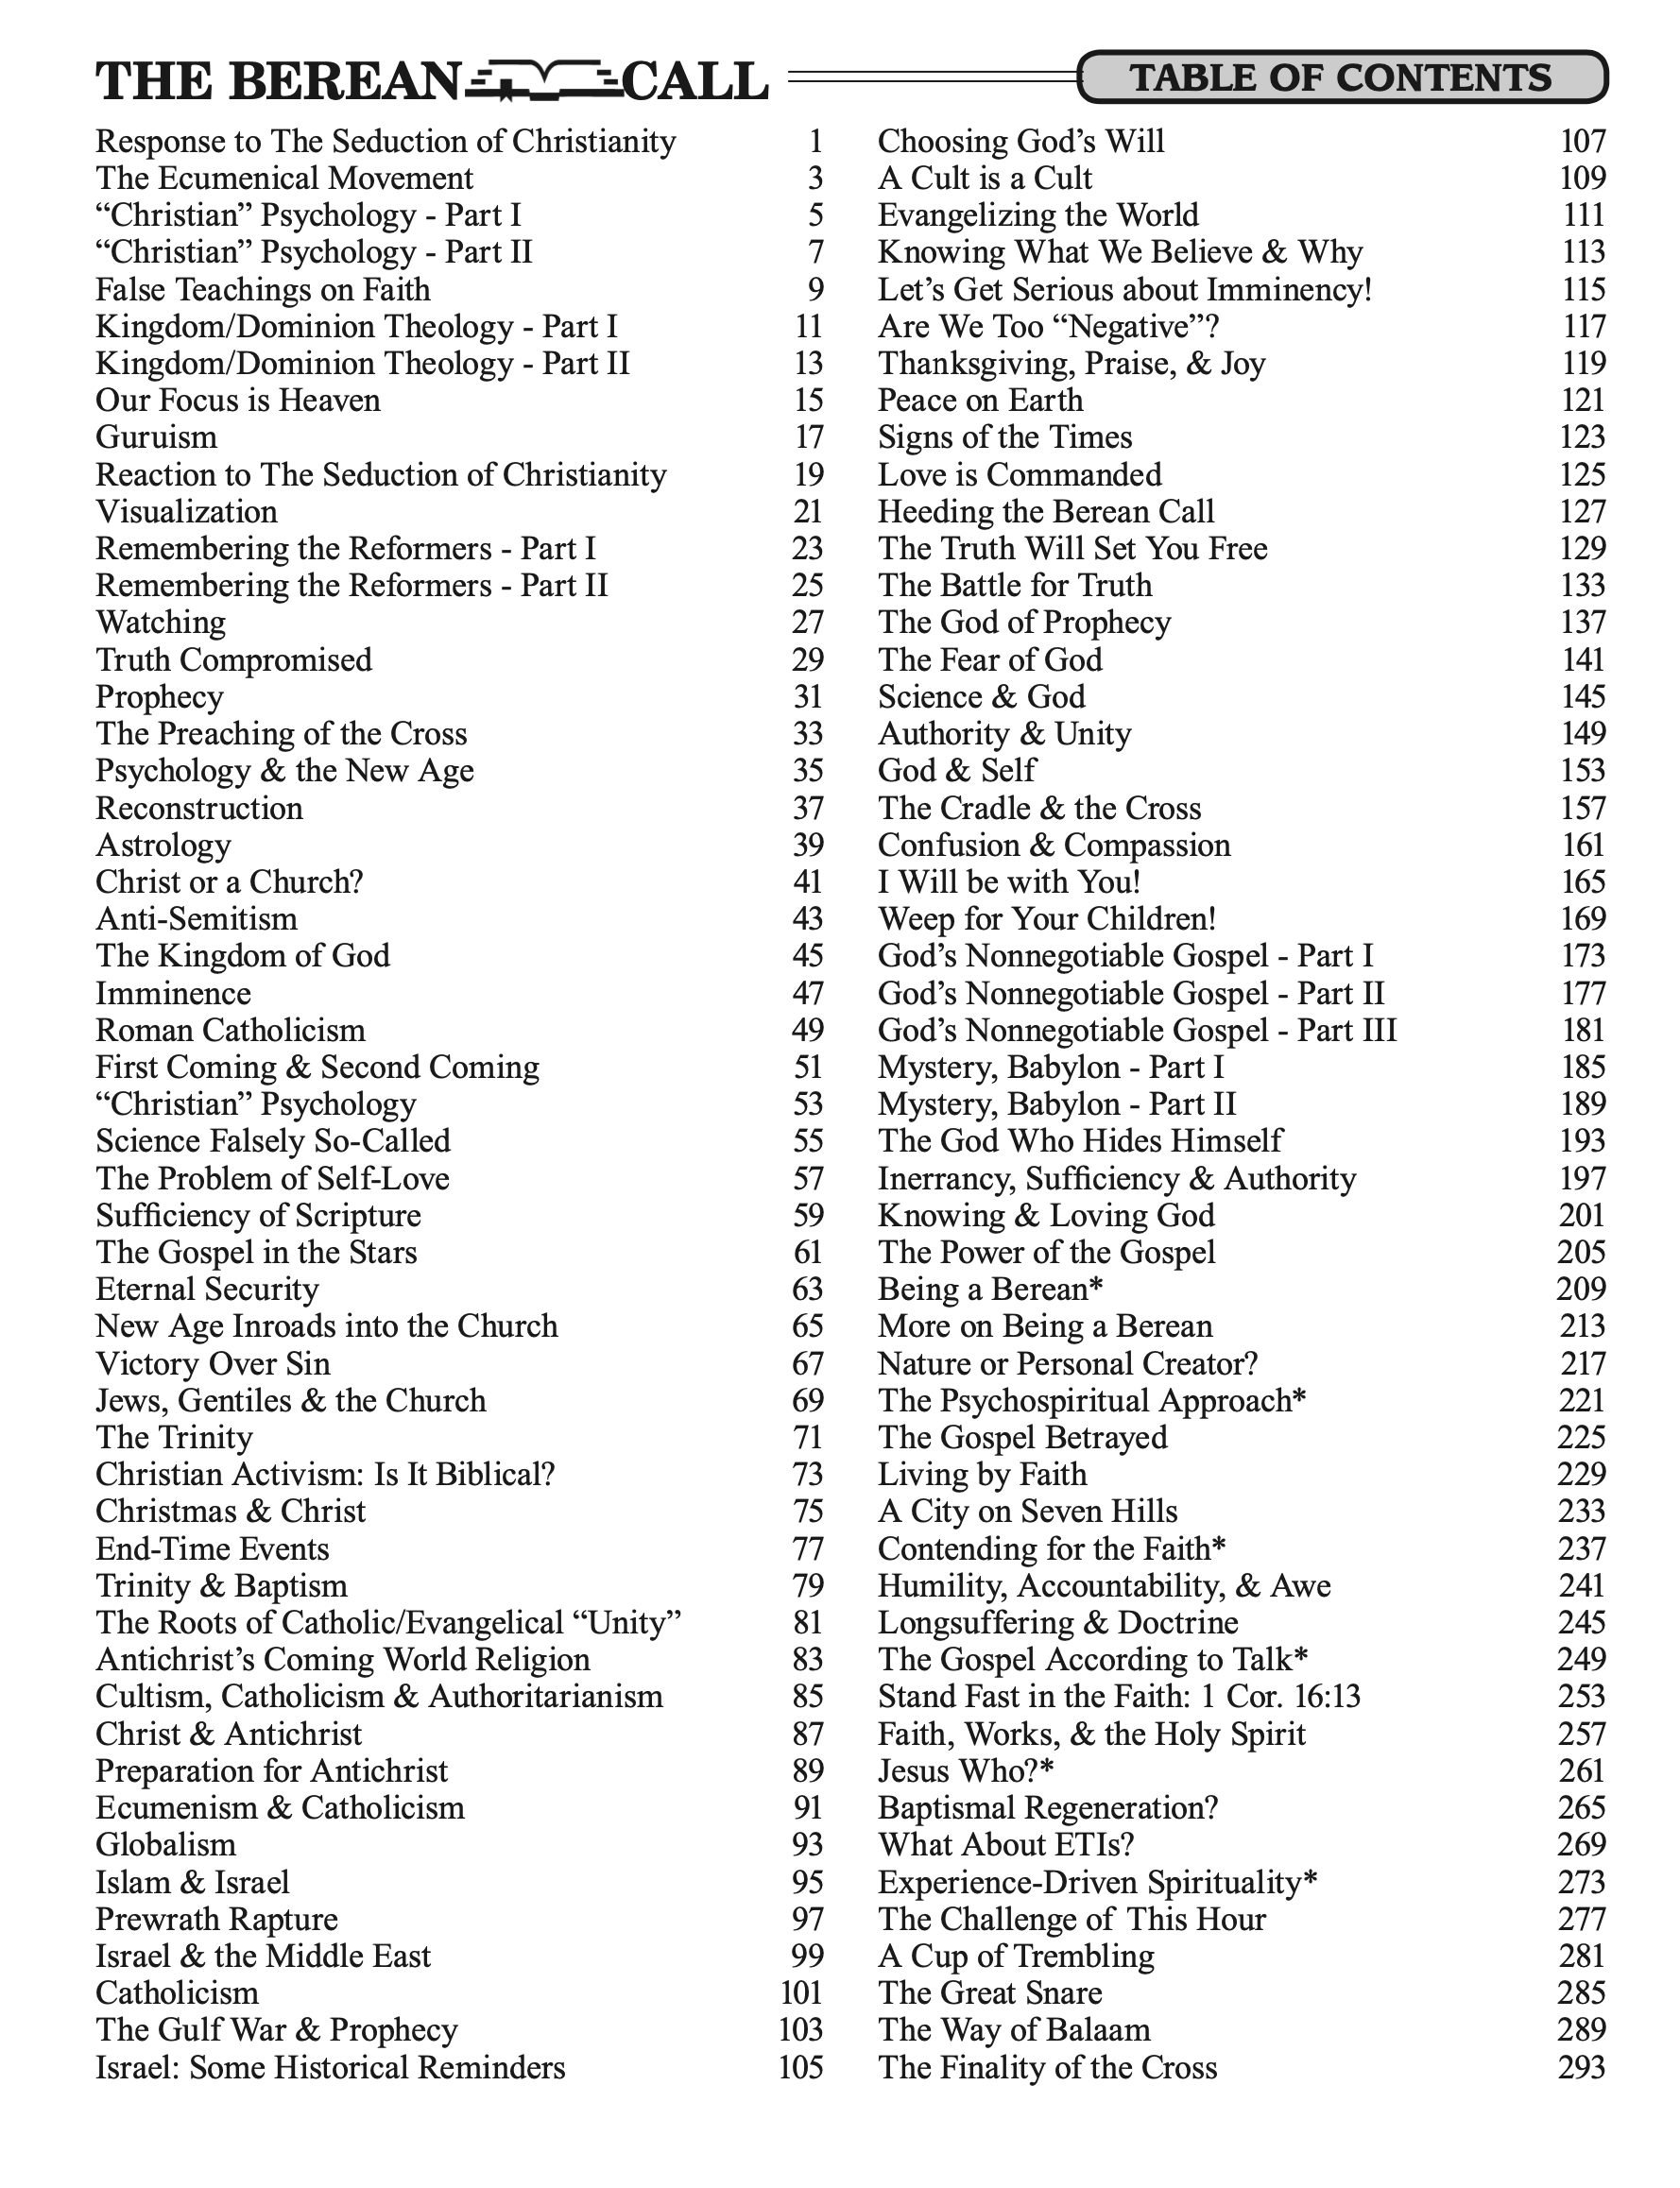 Reprints Table of Contents